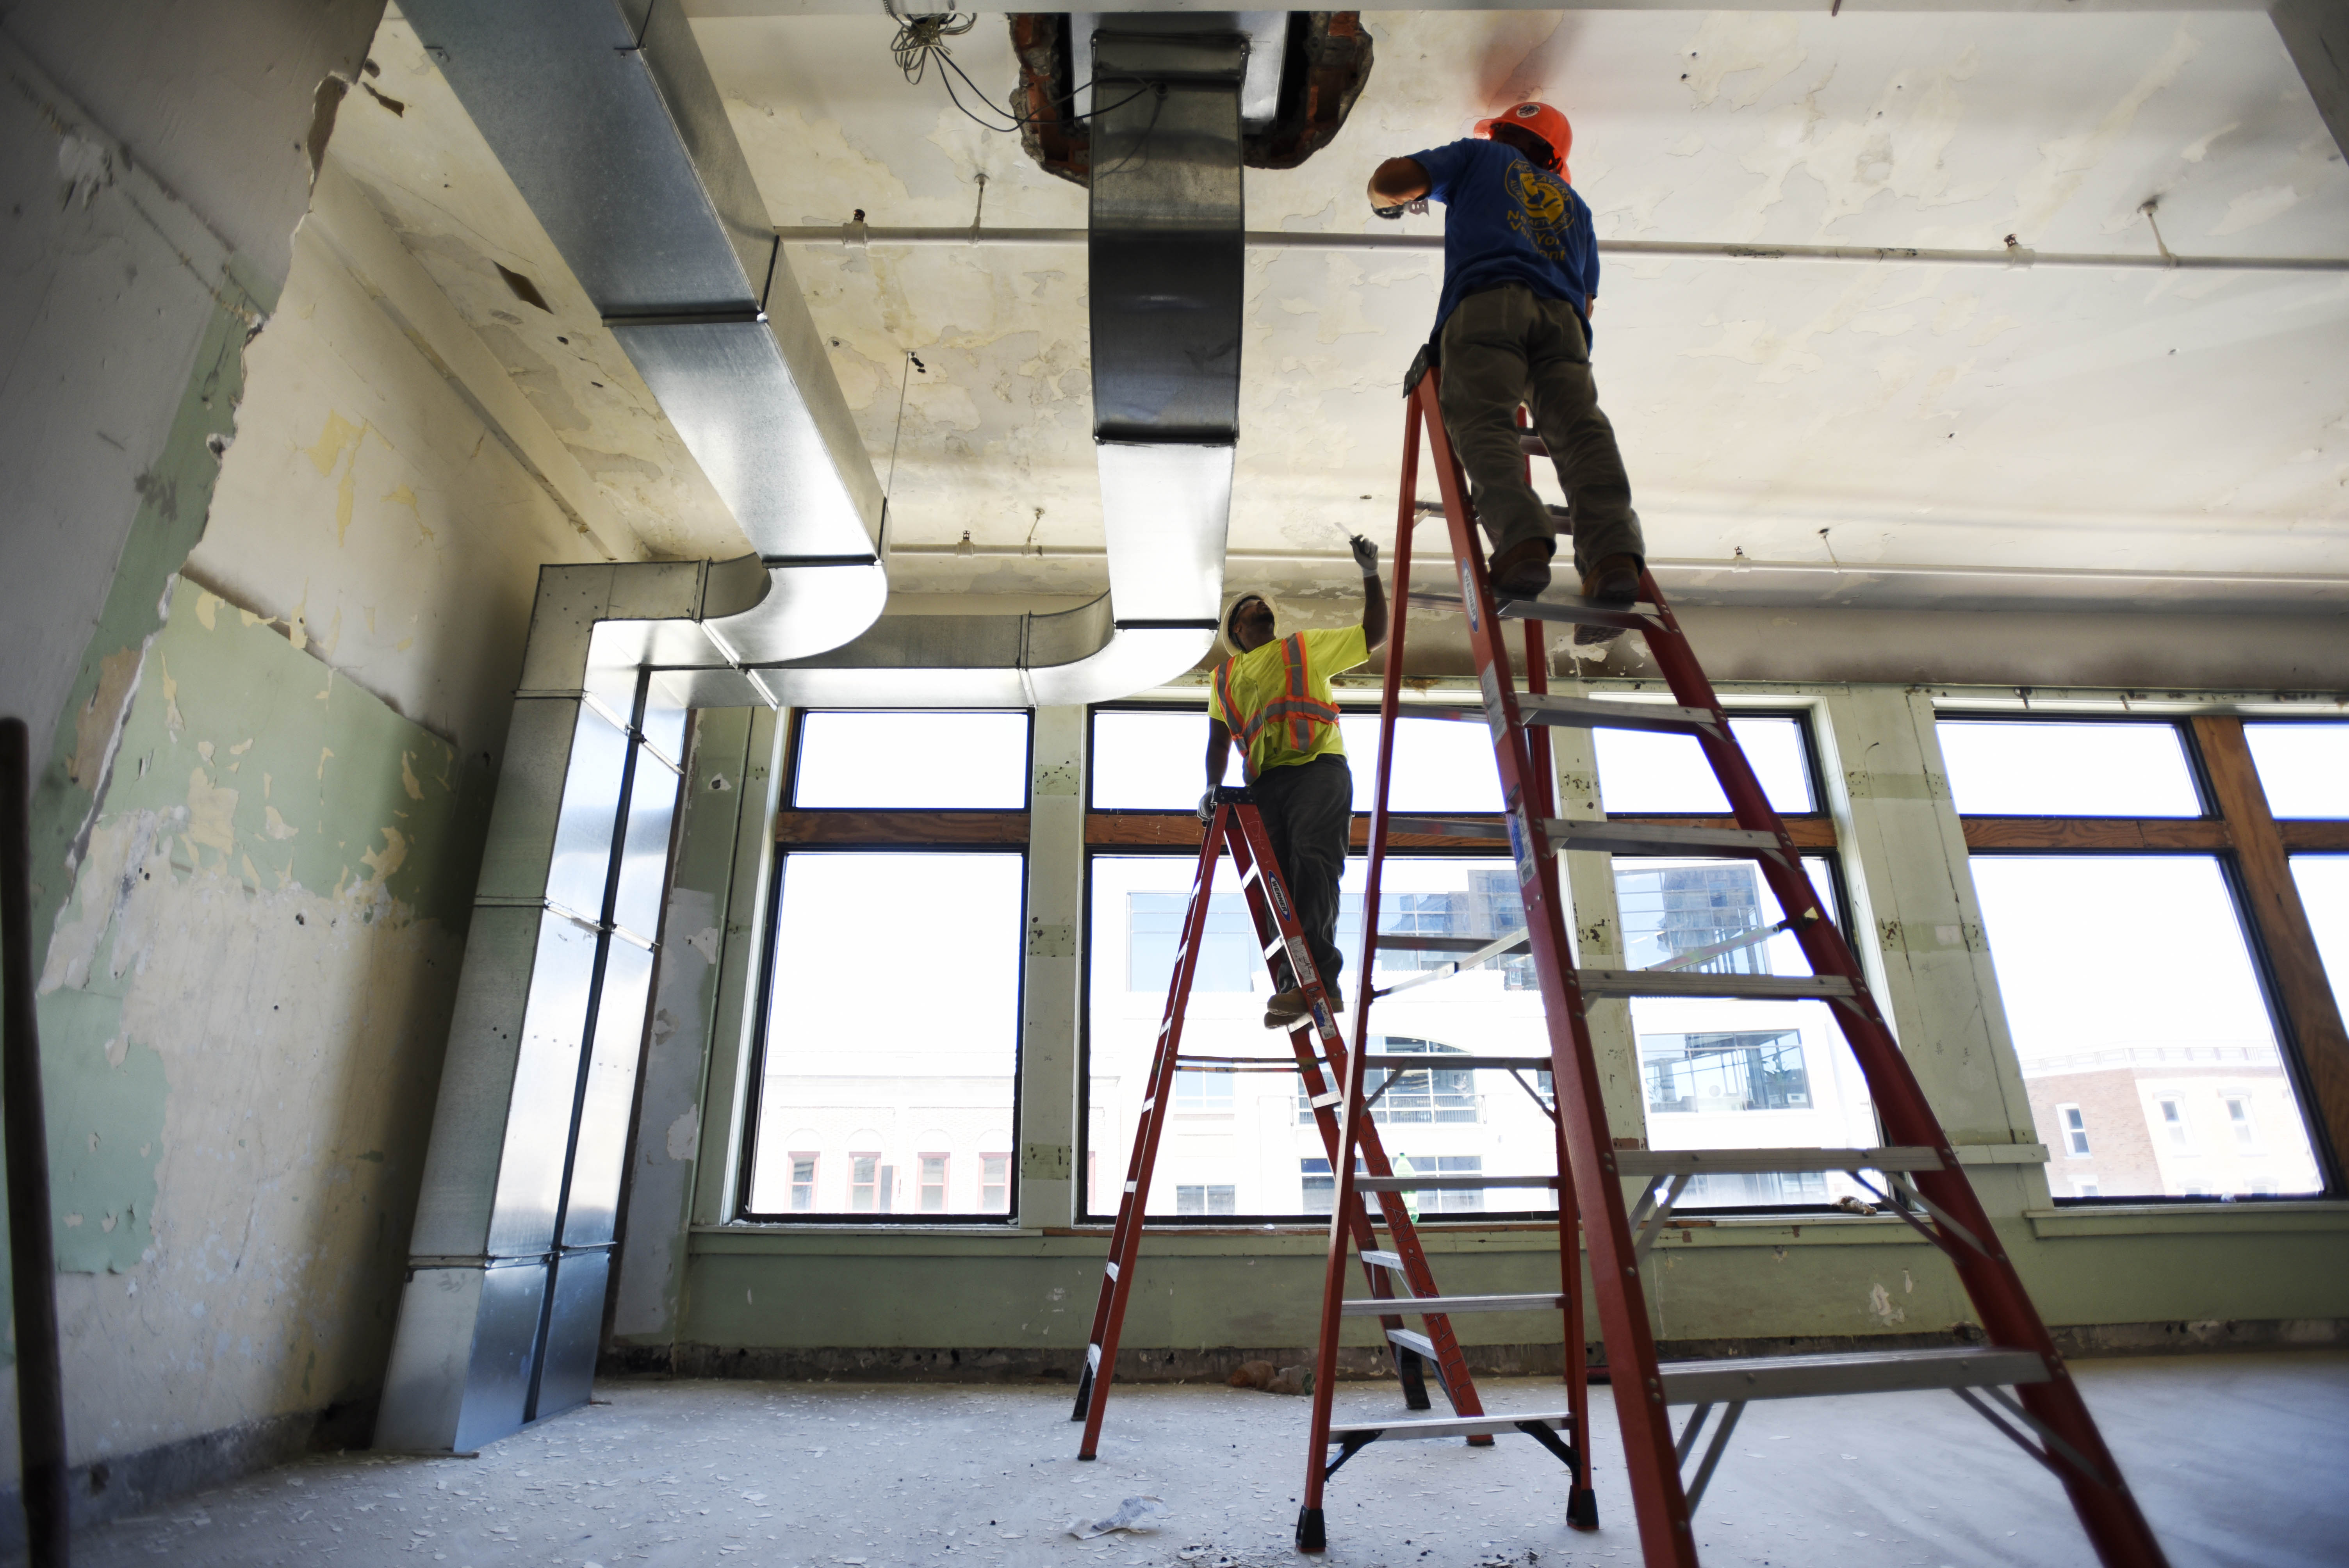 A small crew scrapes paint off the ceiling during the first day of construction on The Adeline Graham Theatrical Training and Innovation Center at Proctors, nicknamed The Addy, Wednesday, June 7, 2017.